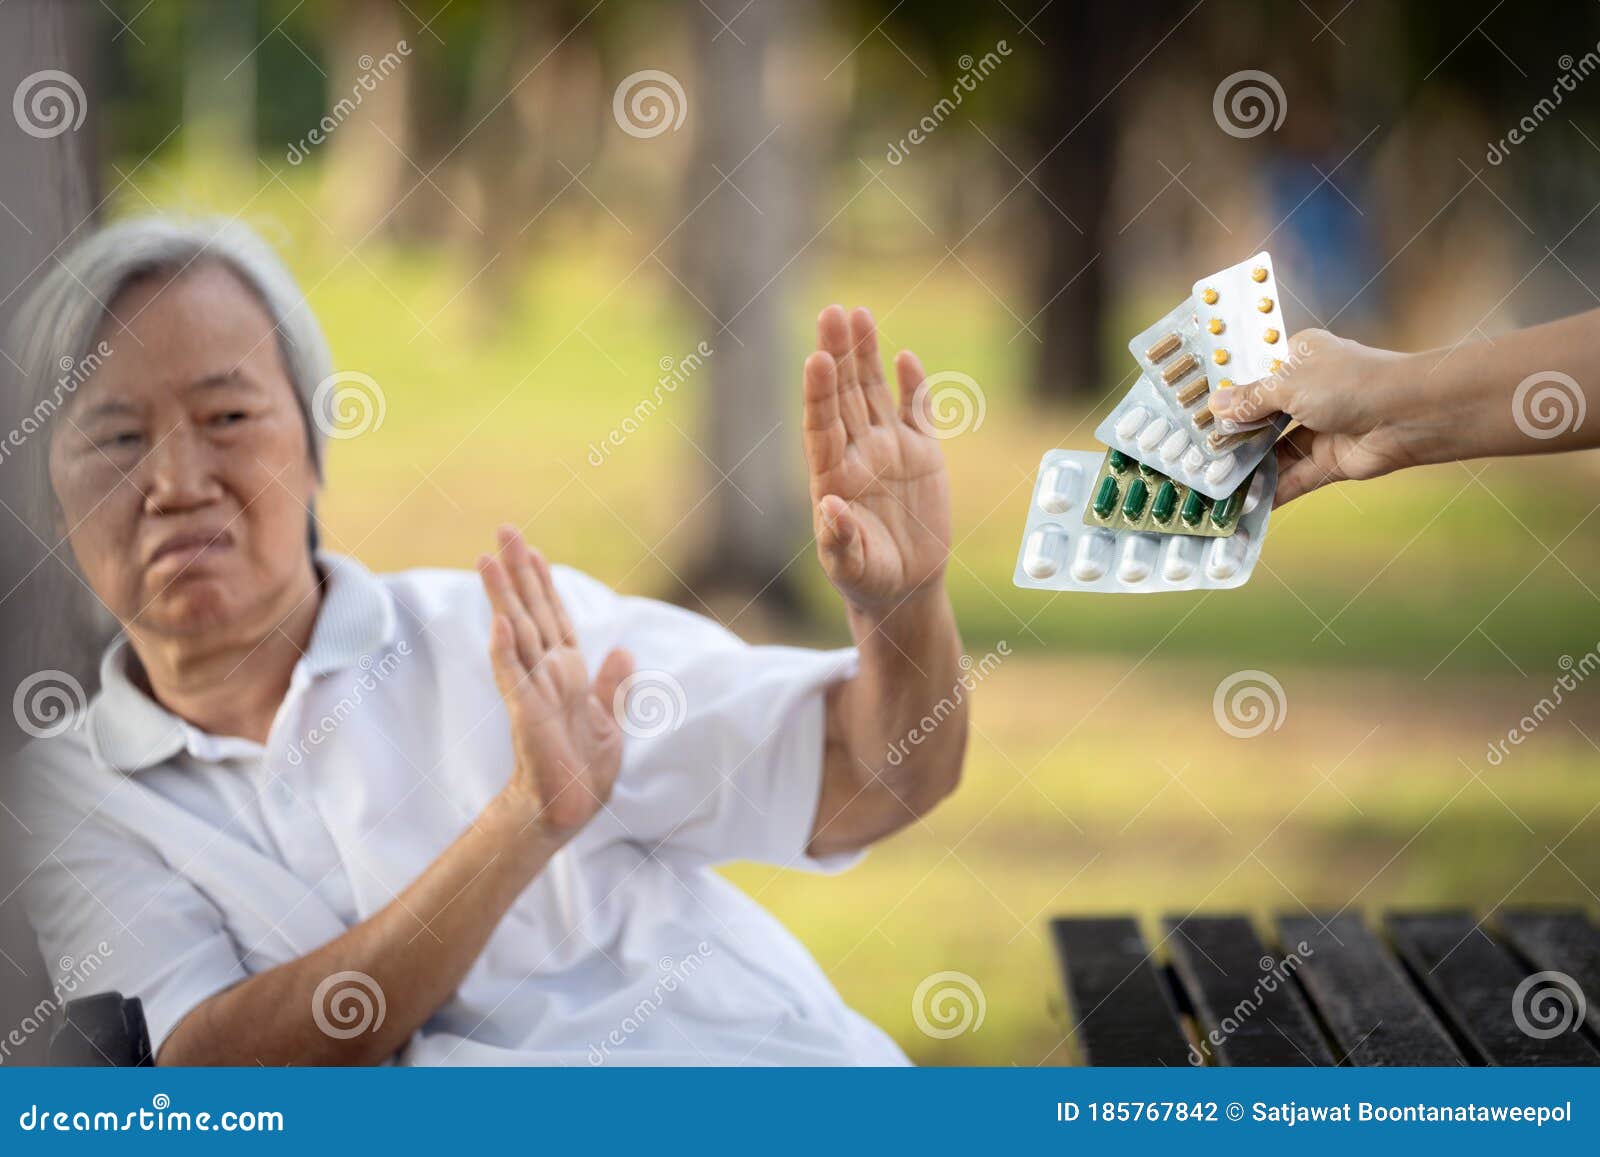 hand of caregiver giving medicine pills and capsules to the elderly,asian senior woman refusing to take medication,afraid,bad side